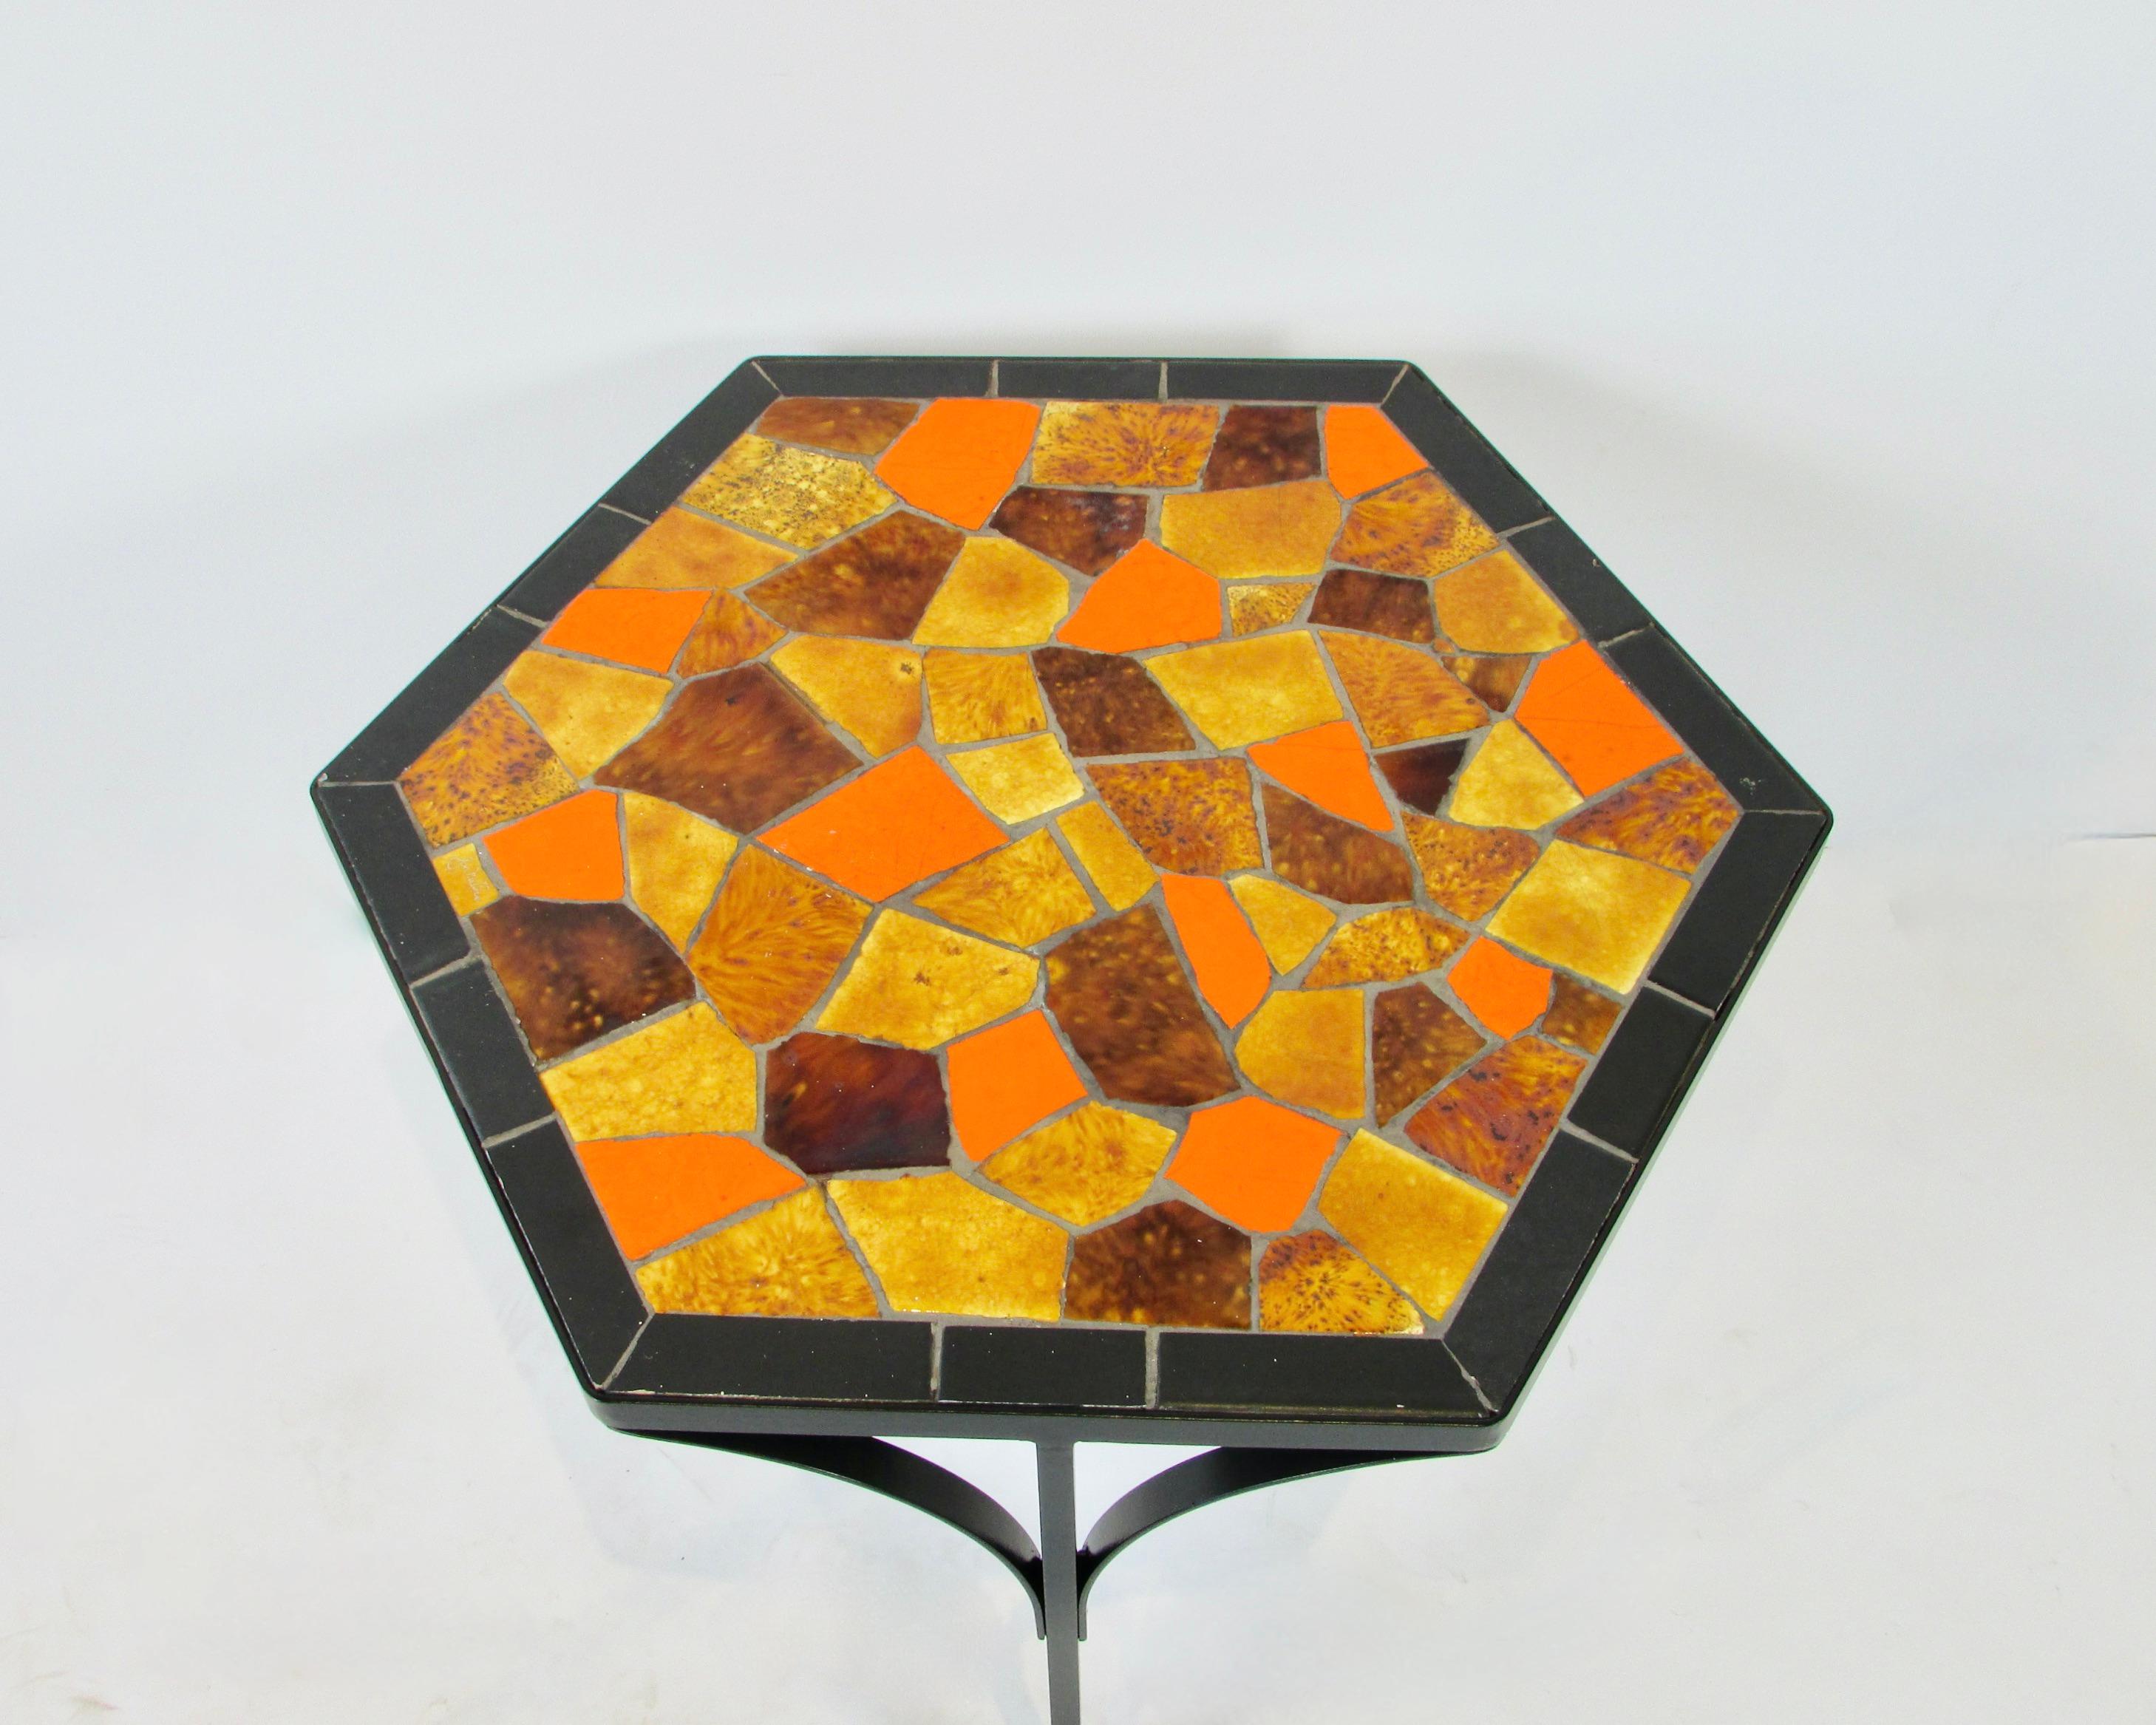 Set of four Jon Matin hexagon shape tile top tables. Included are a pair of matching large tables 23.75 x 20.75 x 18.5 tall. Two graduated tables that will nest or stack under the larger. 
Three wrought iron legs support bright and colorful tiles